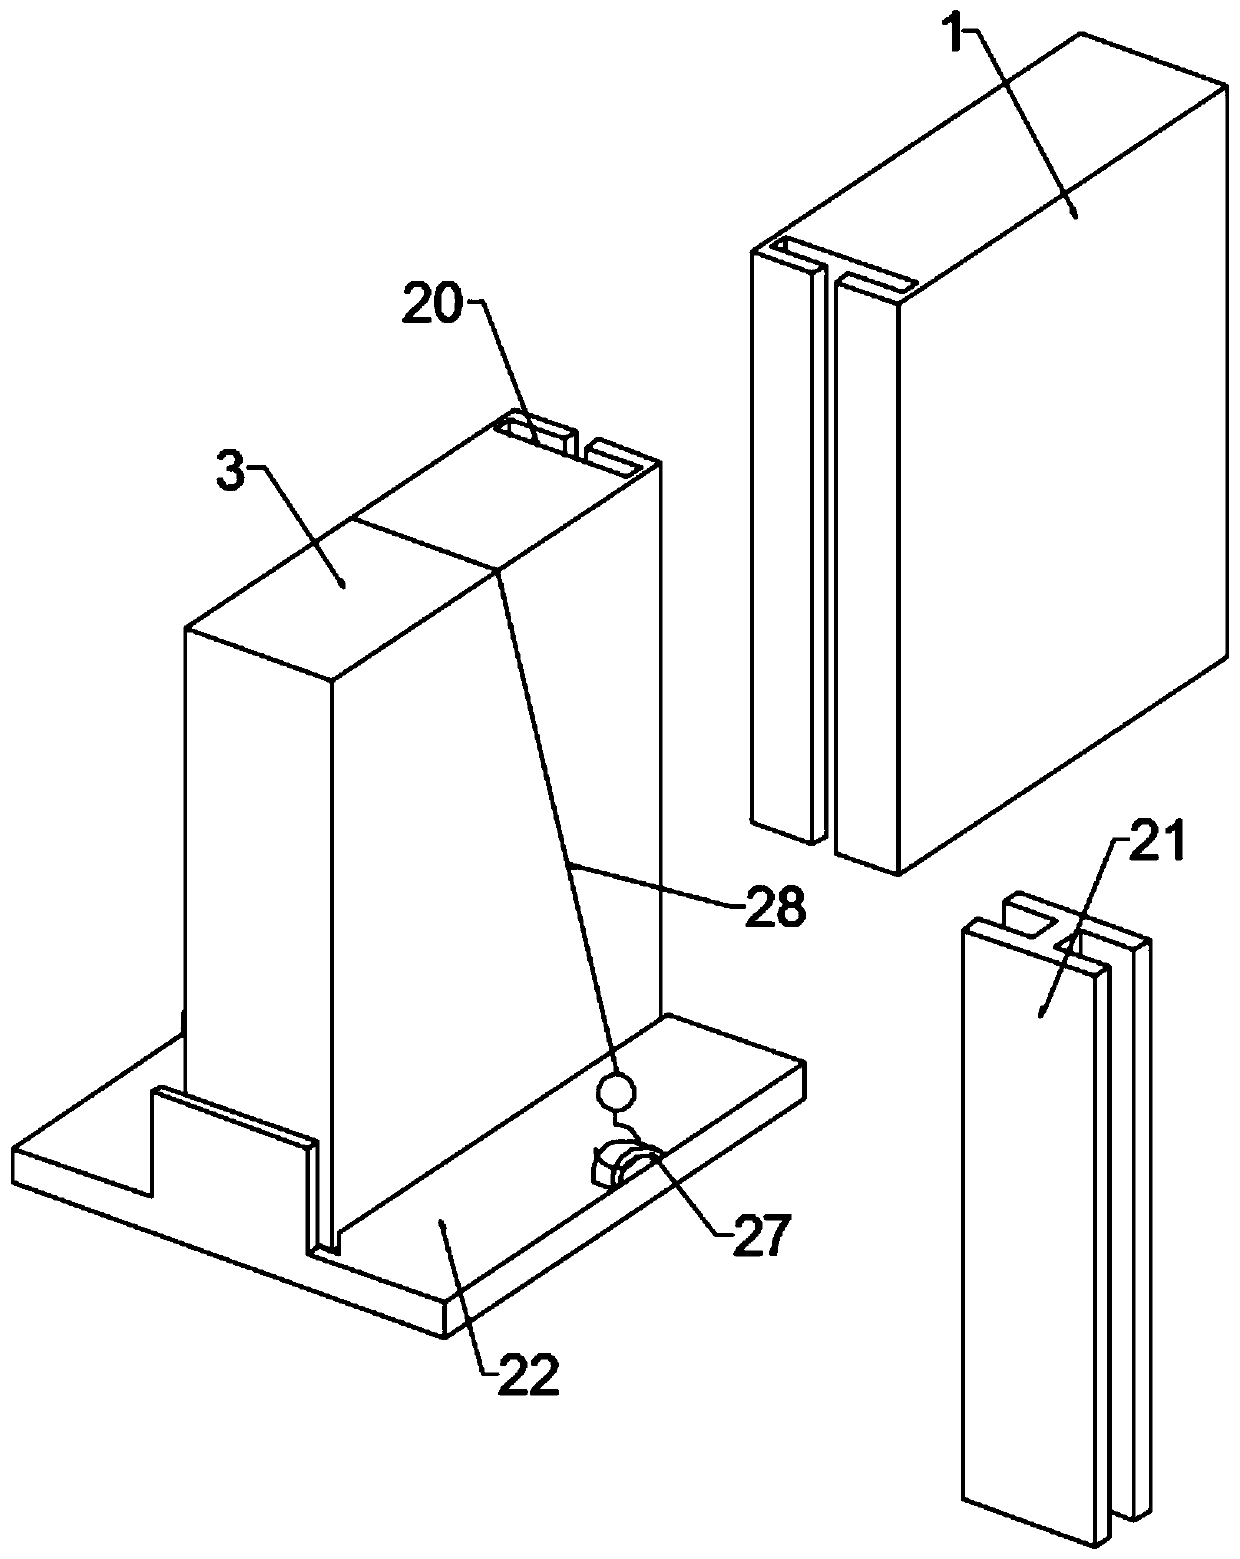 Connecting structure for jointly prefabricating assembly type shear wall and heat-preservation partition wall